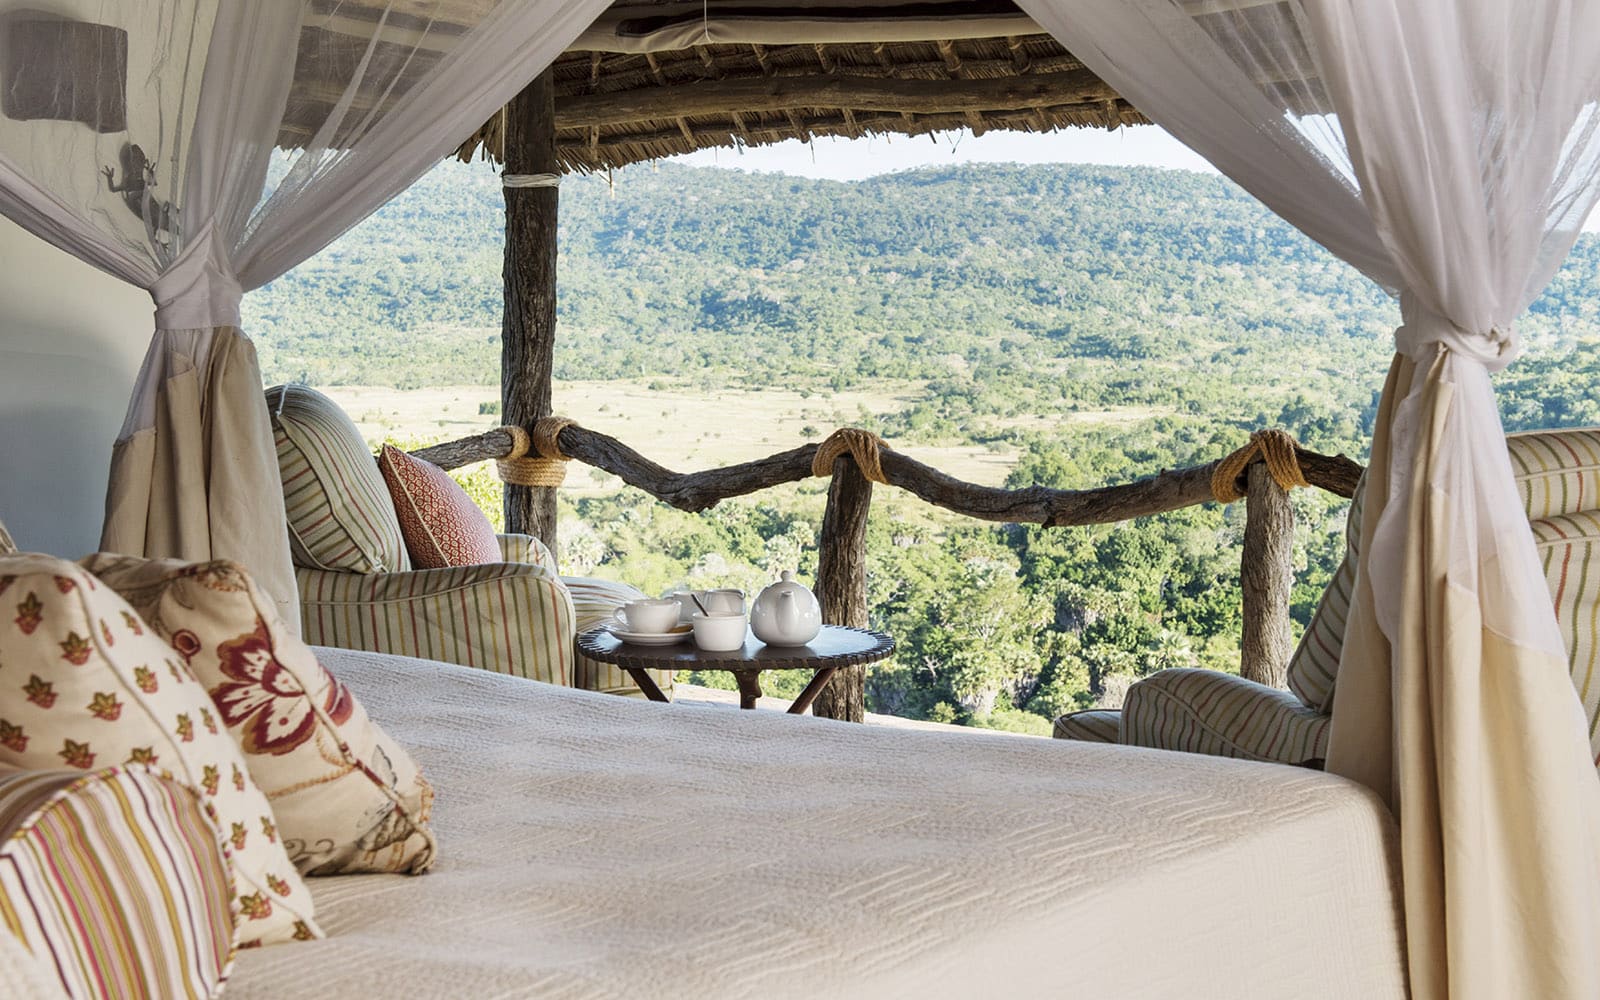 Bailey’s Banda bedroom with sweeping views, one of the lodges in Tanzania with Ker & Downey Africa